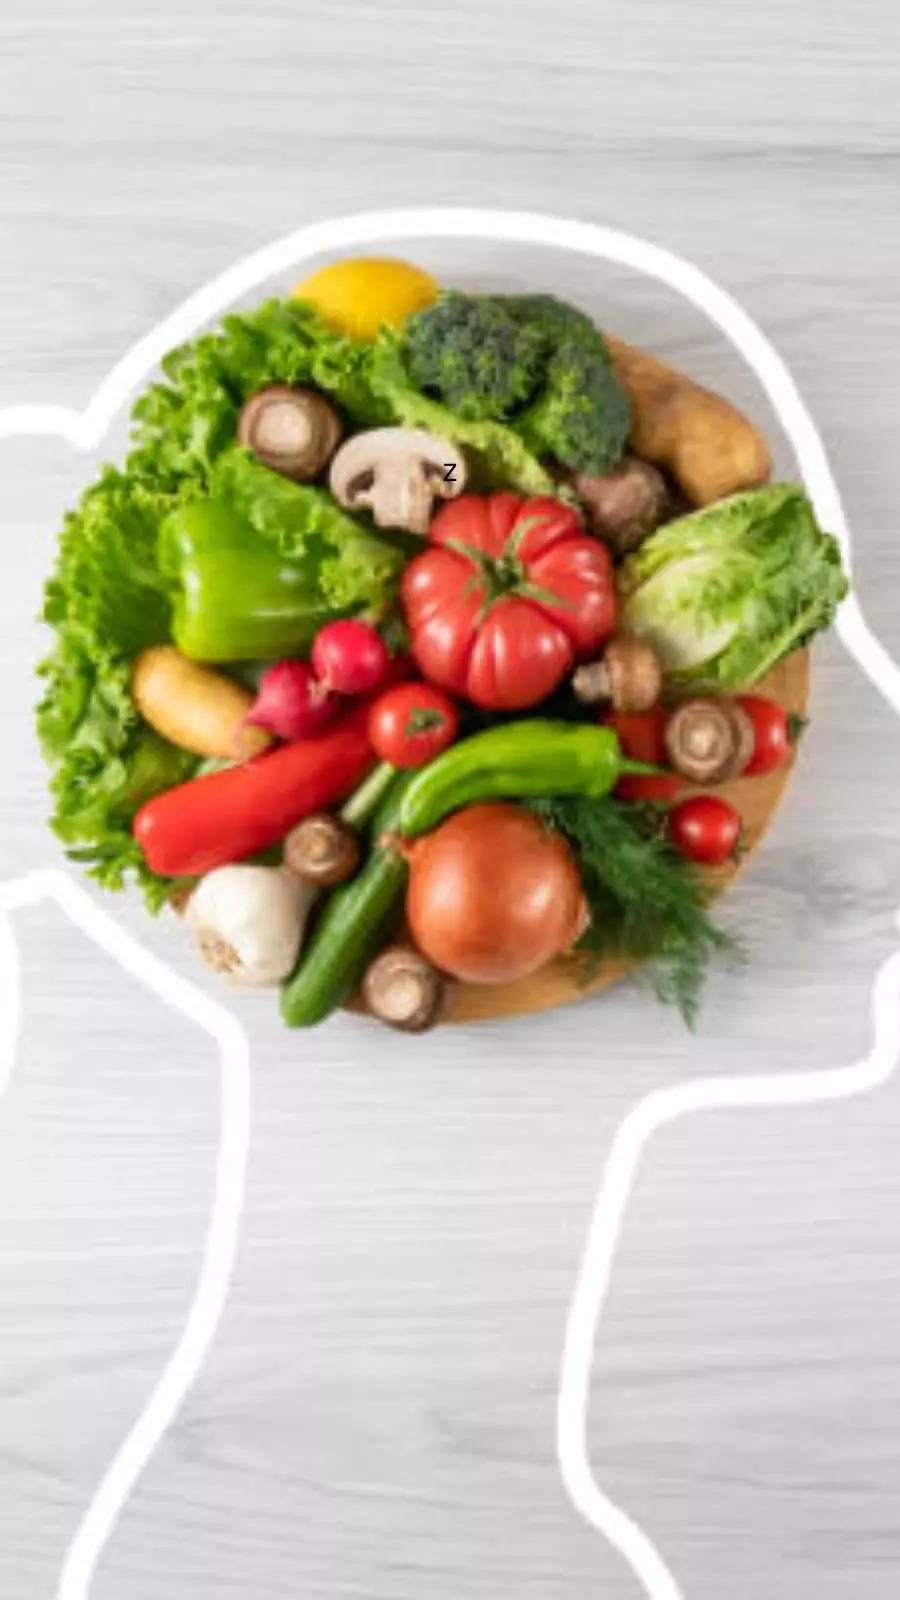 5 Foods That Improve Brain Function and Memory